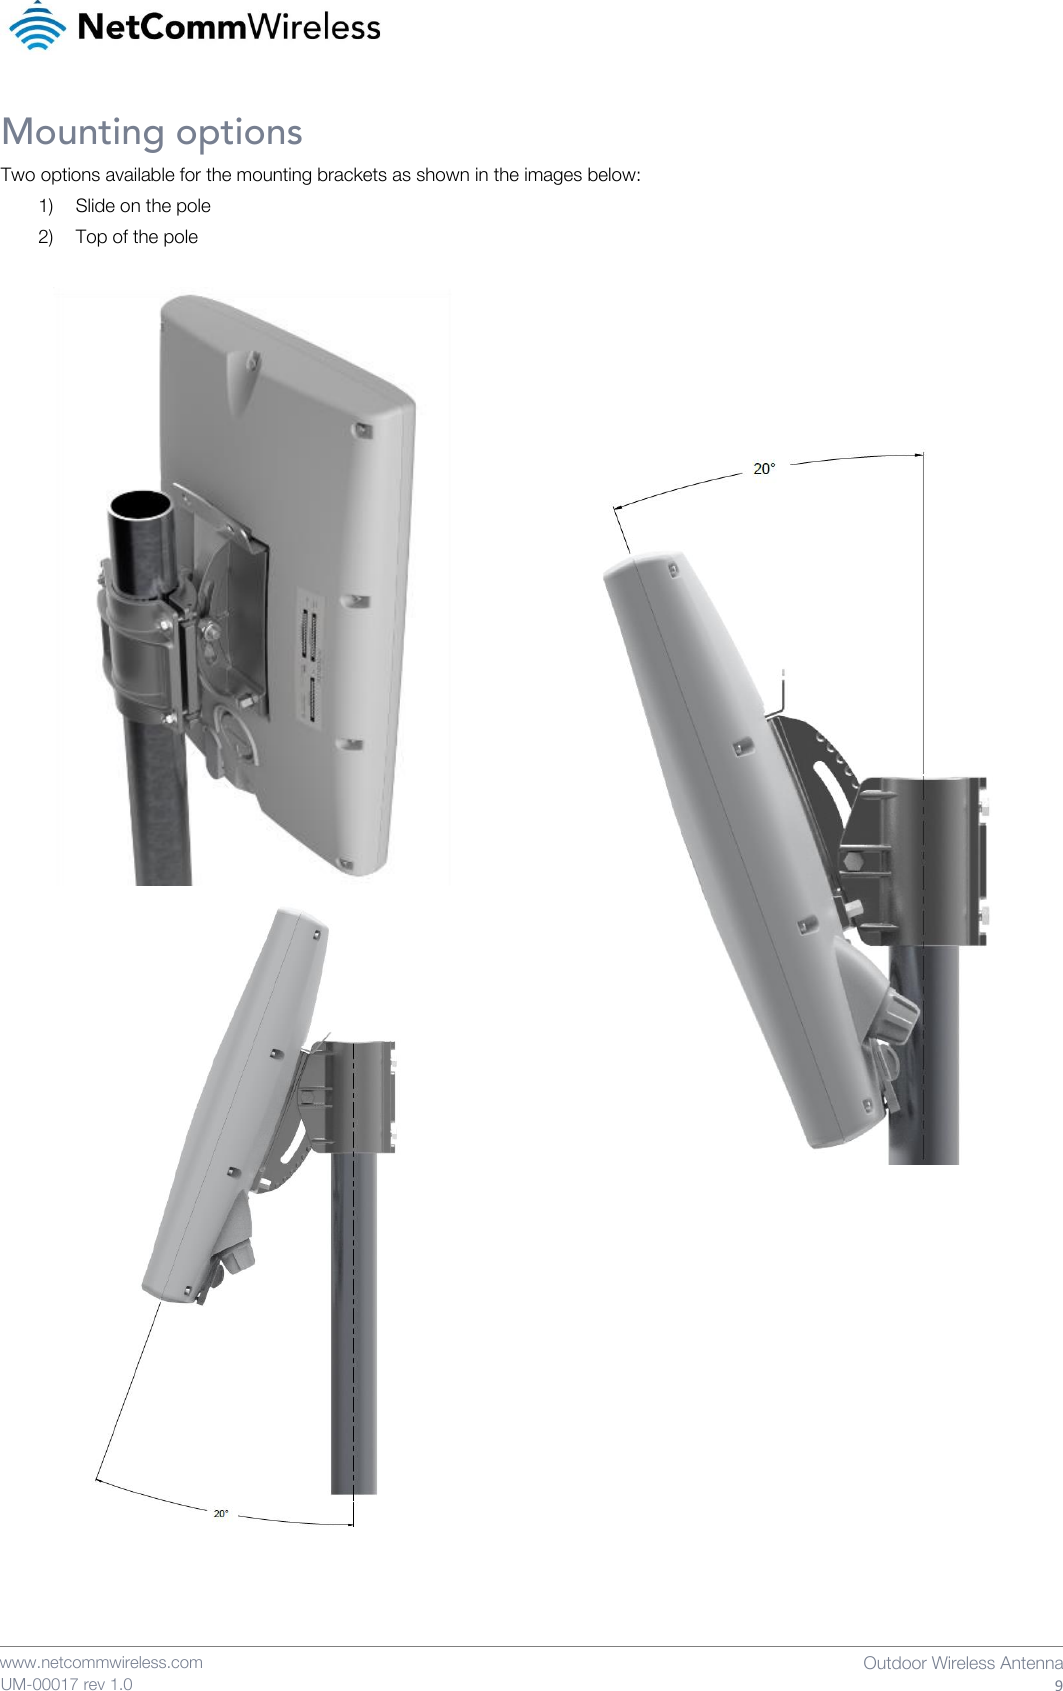    www.netcommwireless.com  Outdoor Wireless Antenna  9 UM-00017 rev 1.0 Mounting options Two options available for the mounting brackets as shown in the images below: 1) Slide on the pole 2) Top of the pole                